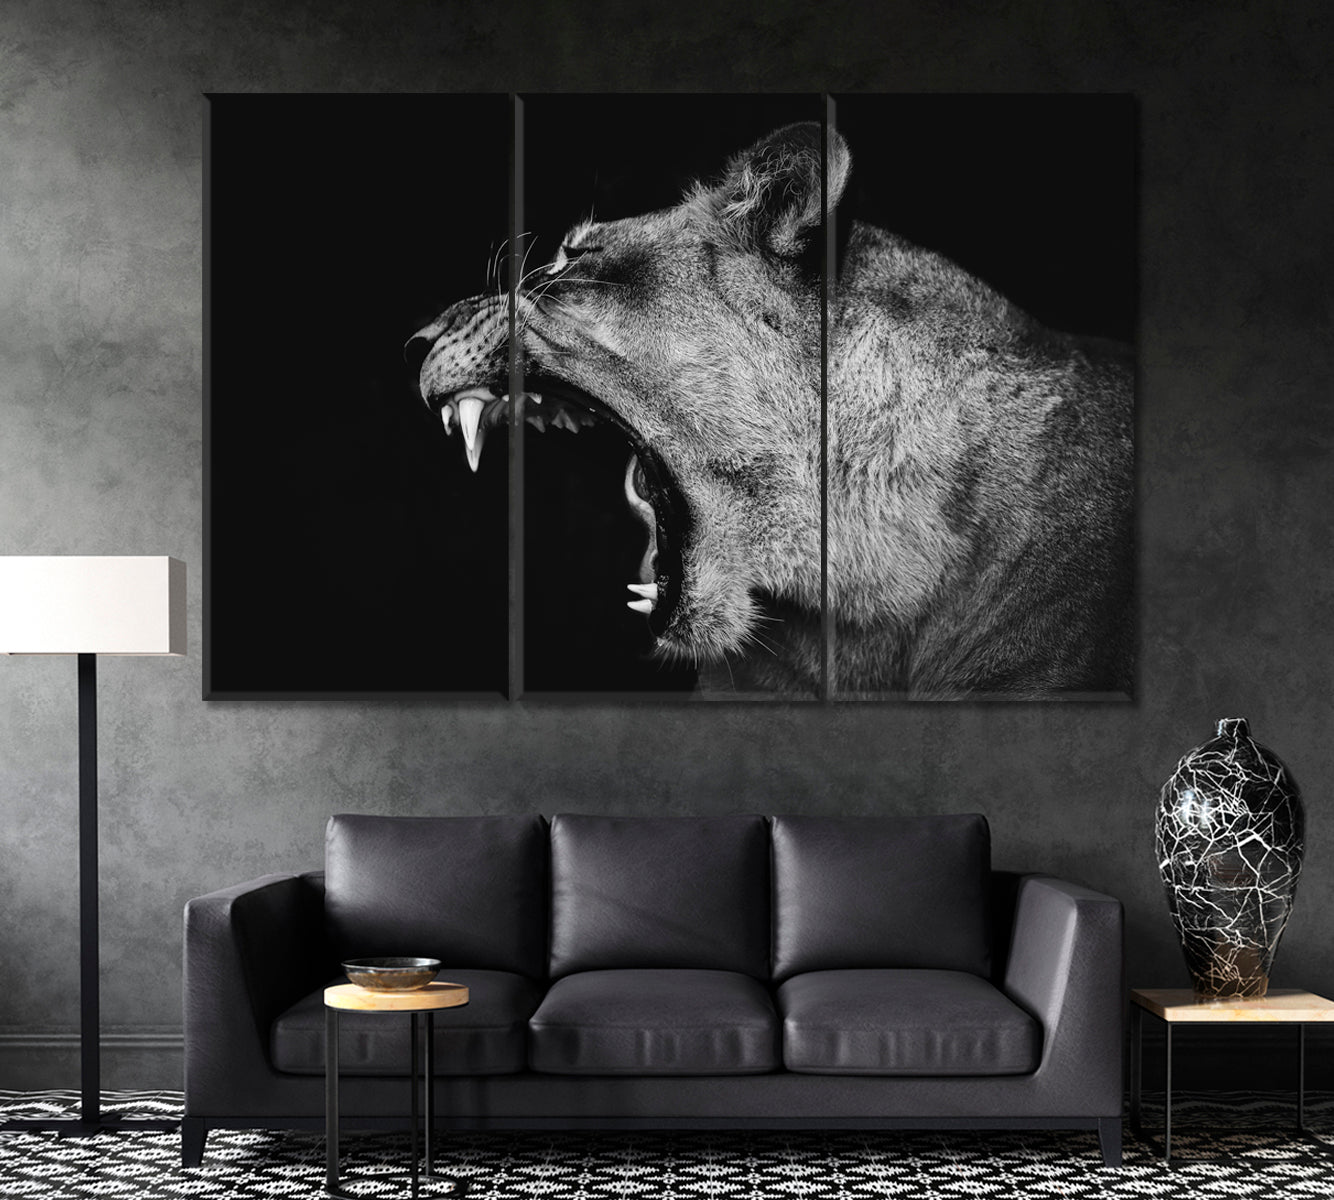 Yawning Lion Canvas Print ArtLexy 3 Panels 36"x24" inches 